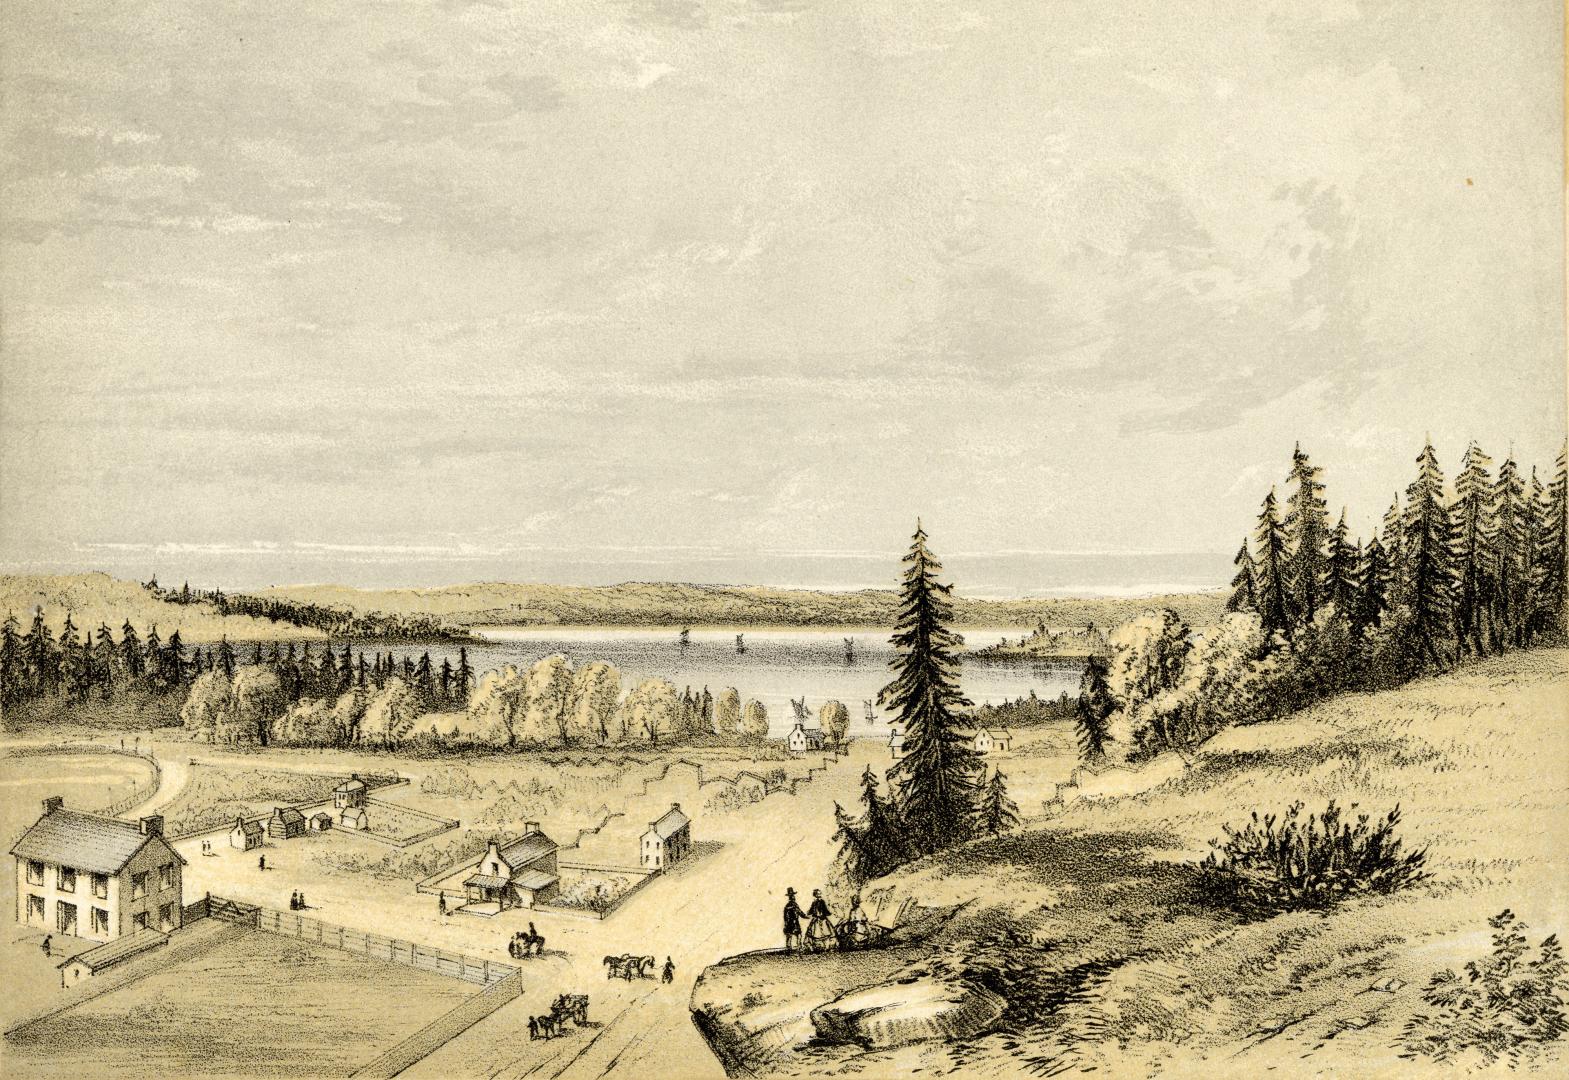 Cameron Lake, from the Church Hill (Fenelon Falls, Ontario) in 1858